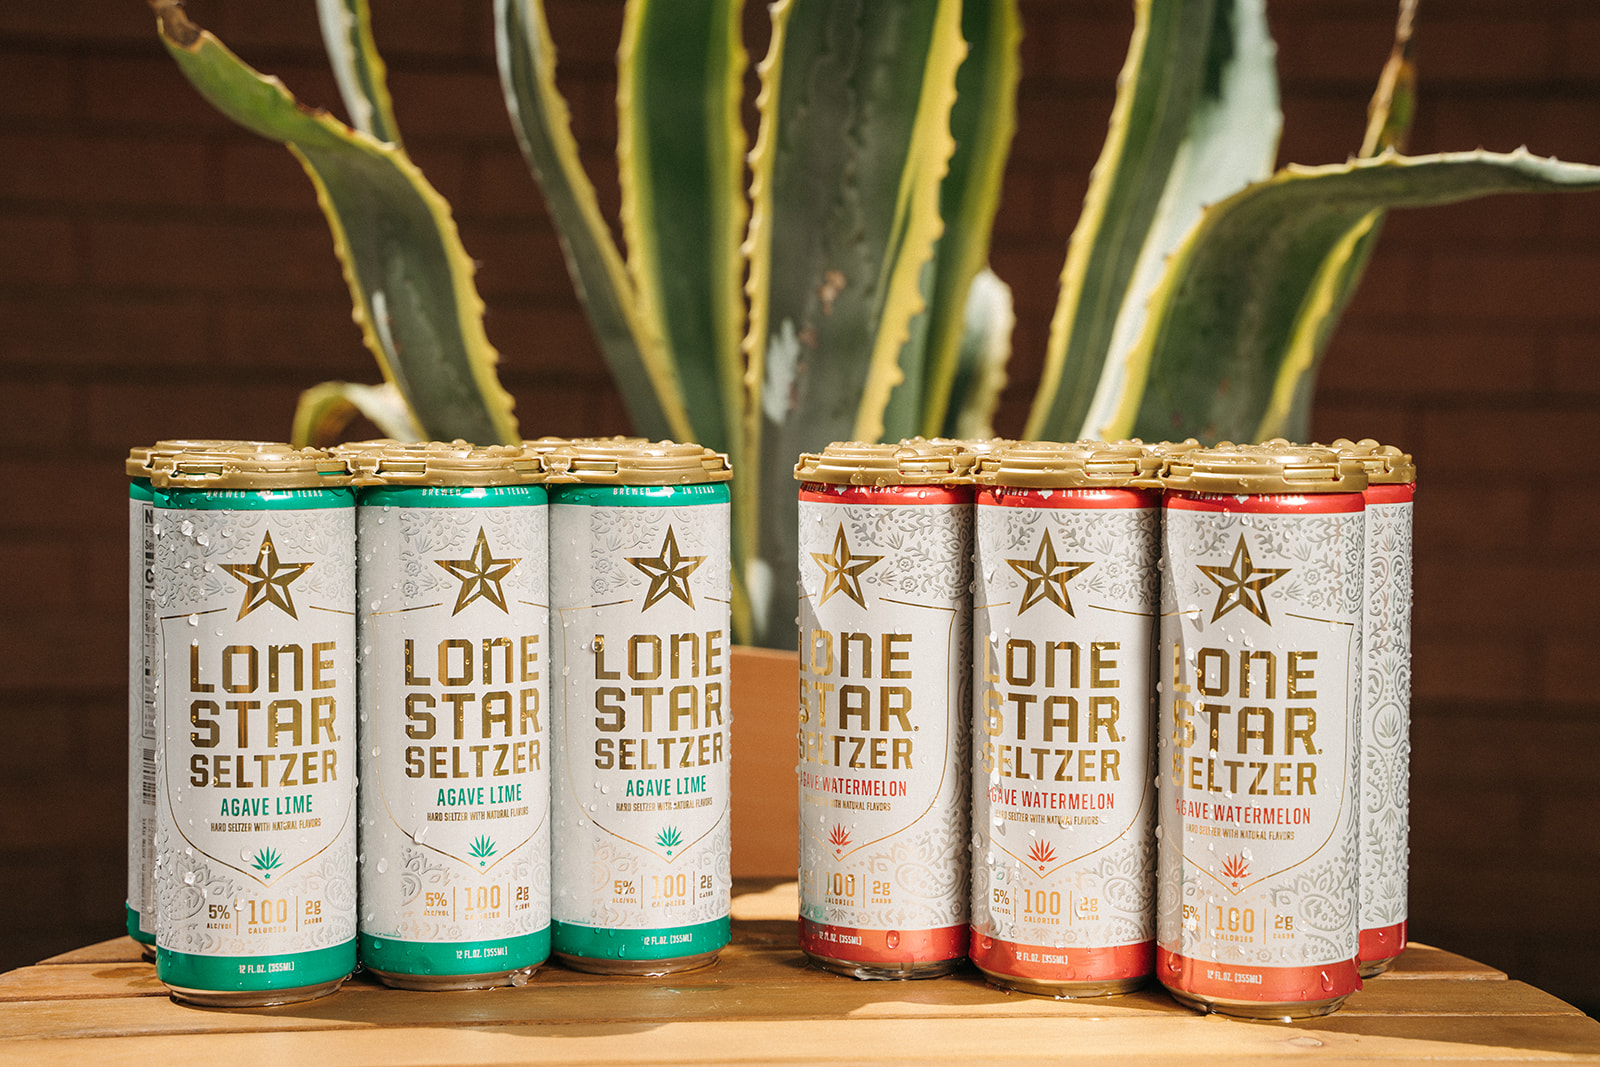 Lone Star Brewing’s Lone Star Seltzer